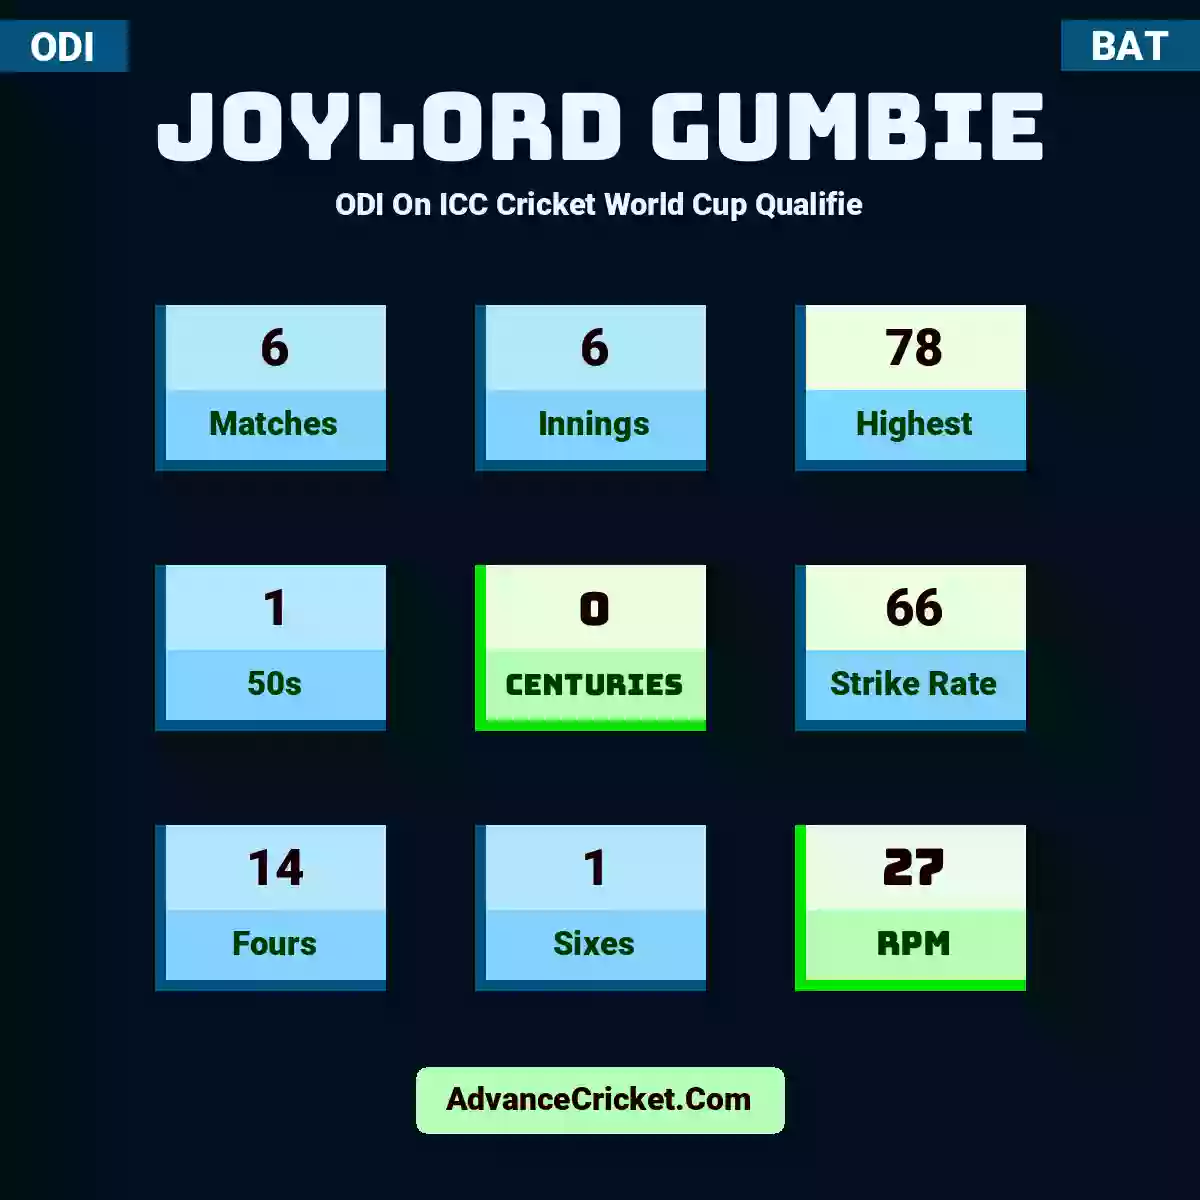 Joylord Gumbie ODI  On ICC Cricket World Cup Qualifie, Joylord Gumbie played 6 matches, scored 78 runs as highest, 1 half-centuries, and 0 centuries, with a strike rate of 66. J.Gumbie hit 14 fours and 1 sixes, with an RPM of 27.